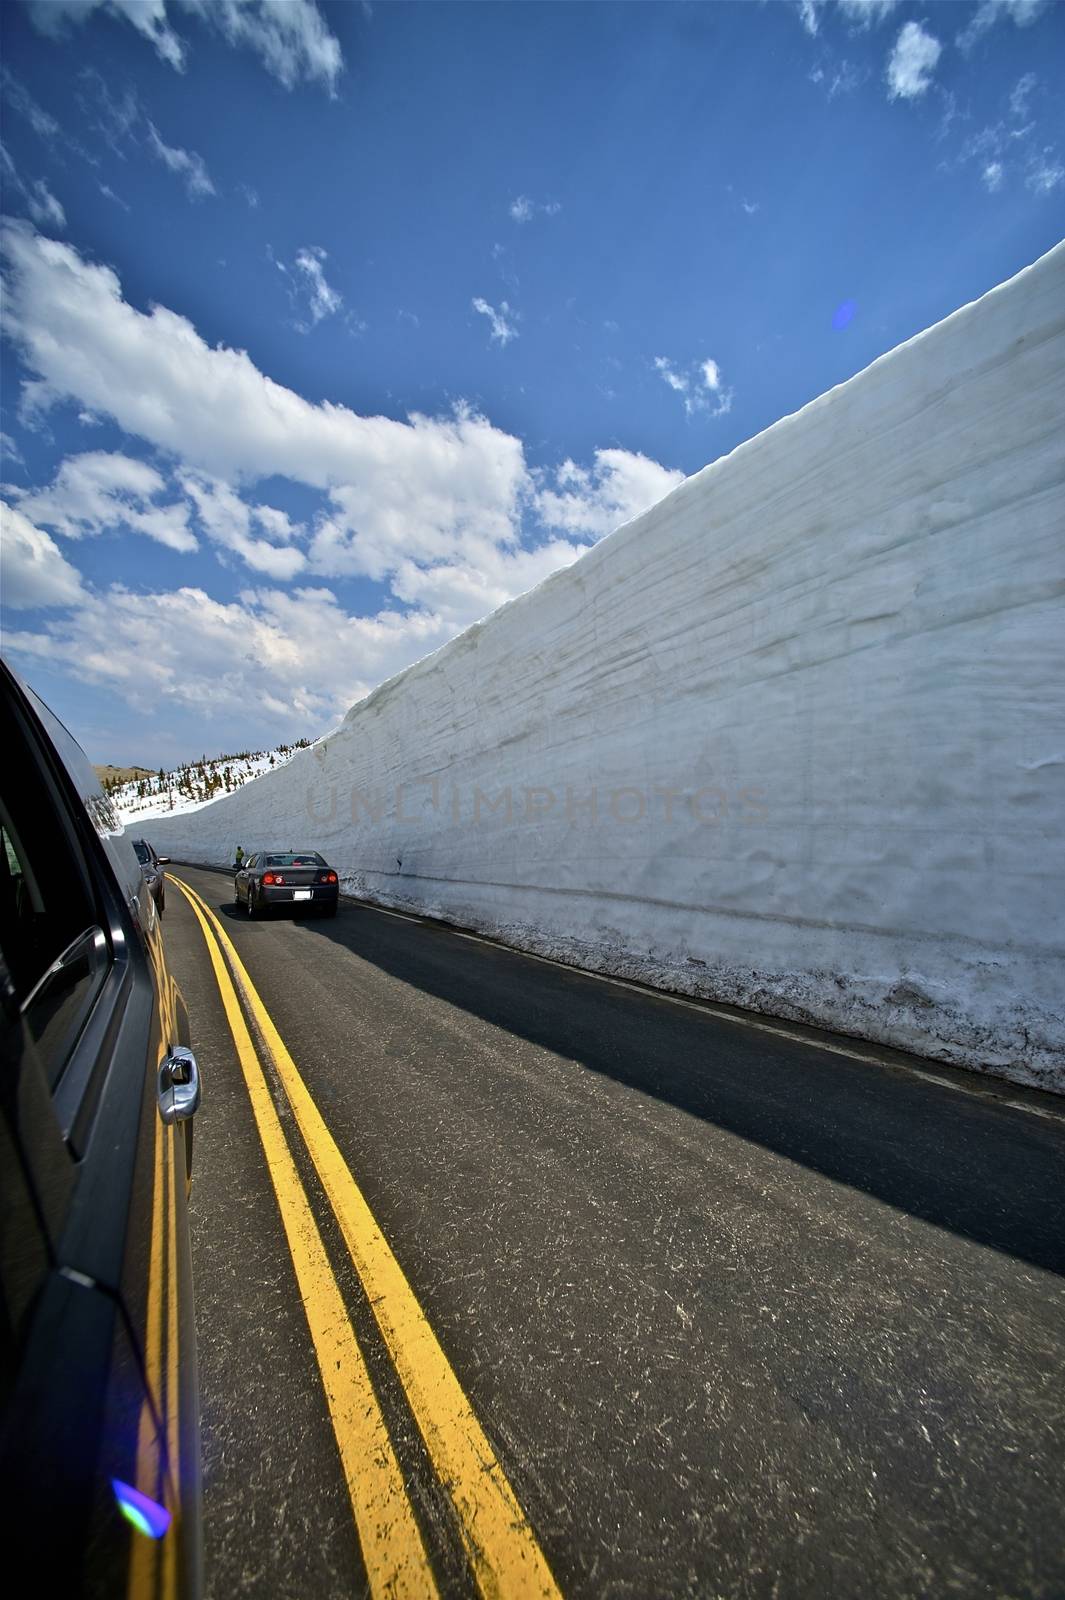 Roadside Snow Wall. Steep Slopes - Heavy Snowfields. Rocky Mountains National Park, Colorado USA. Early June.